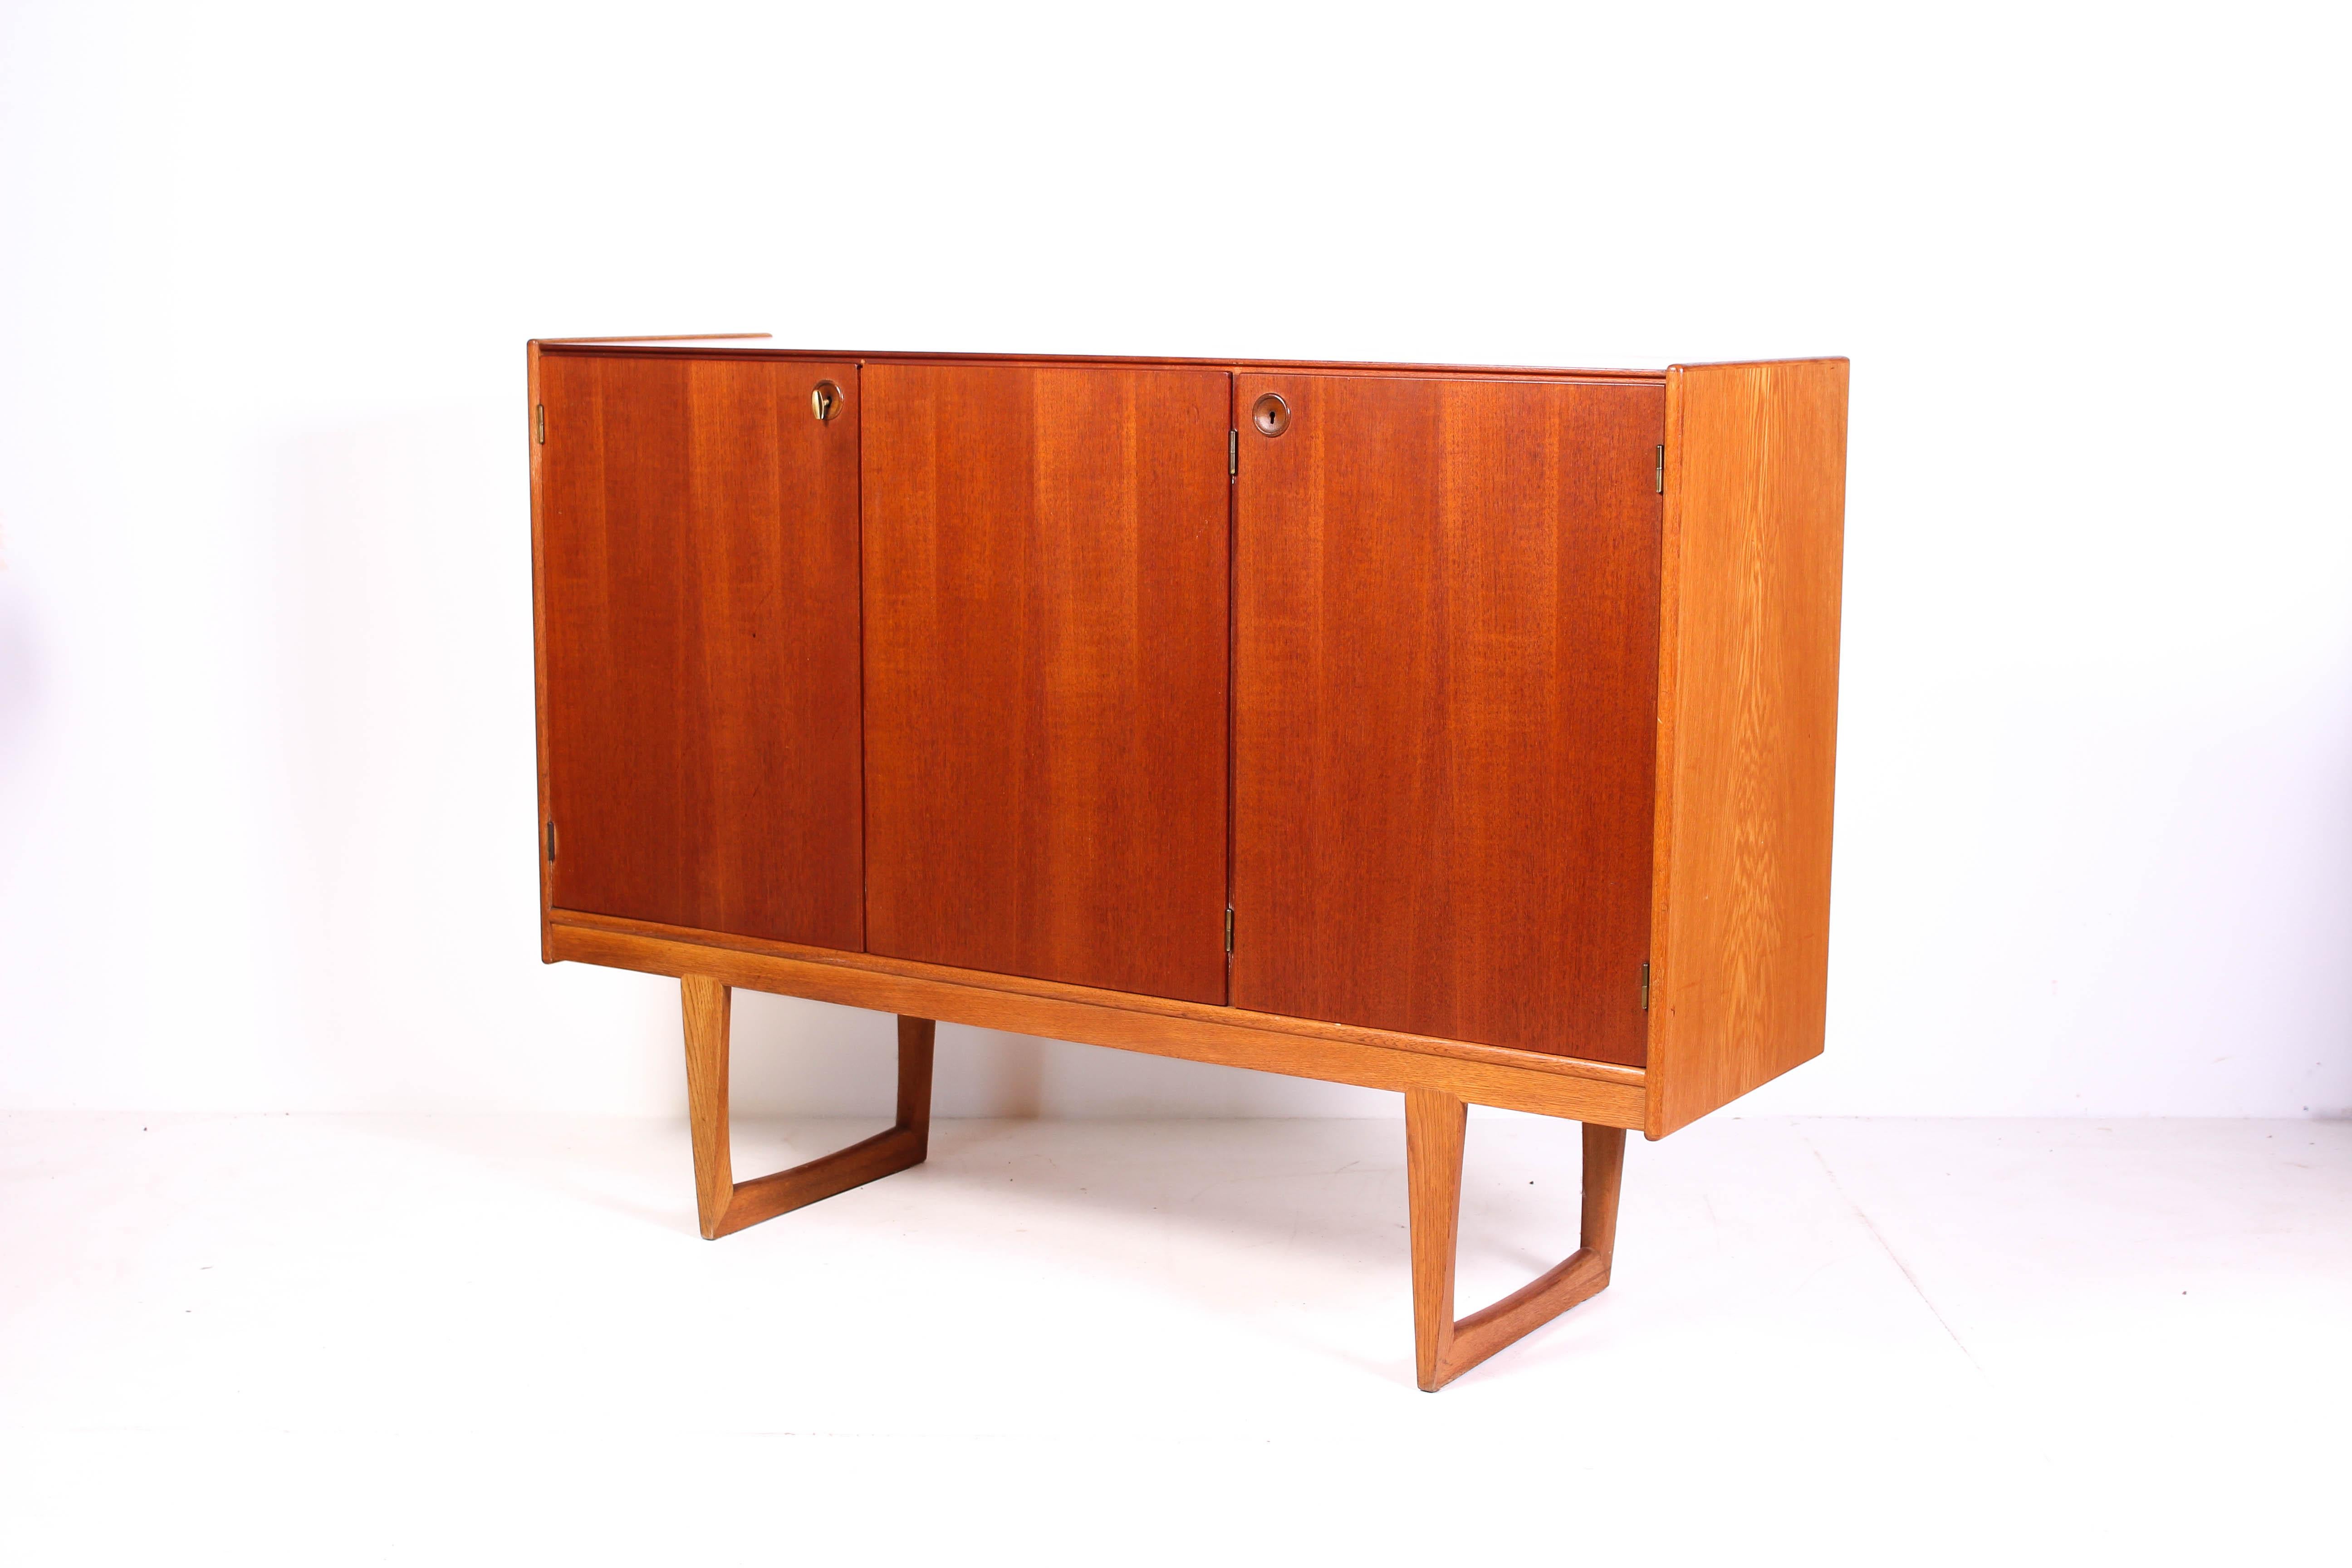 Midcentury sideboard by Swedish designer Yngvar Sandström manufactured by Nordiska Kompaniet. The sideboard has a teak front and legs and sides made out of oak. 

The sideboard is in very good vintage condition with minor signs of usage consistent